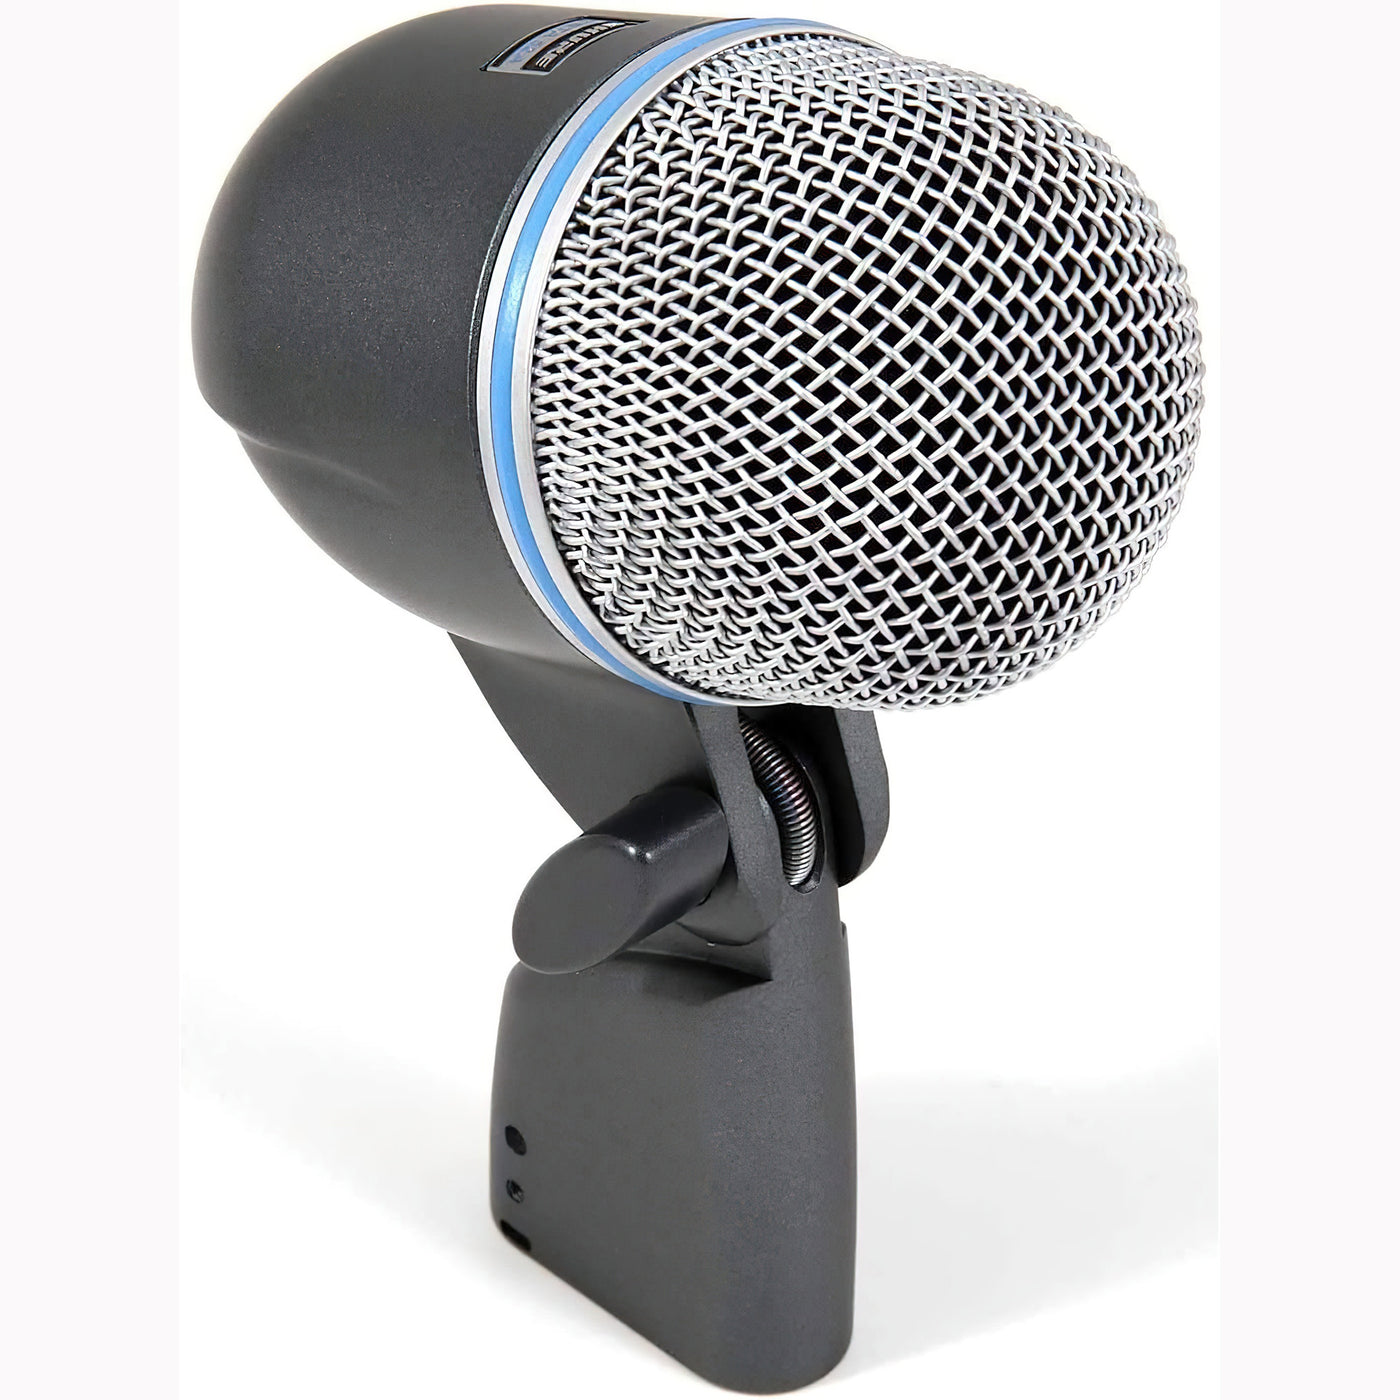 Shure Kick Drum Microphone, Supercardioid Dynamic Mic with High Output Neodymium Element, Locking Stand Adapter, Durable Steel Mesh Grille, and Shock Mount (BETA 52A)